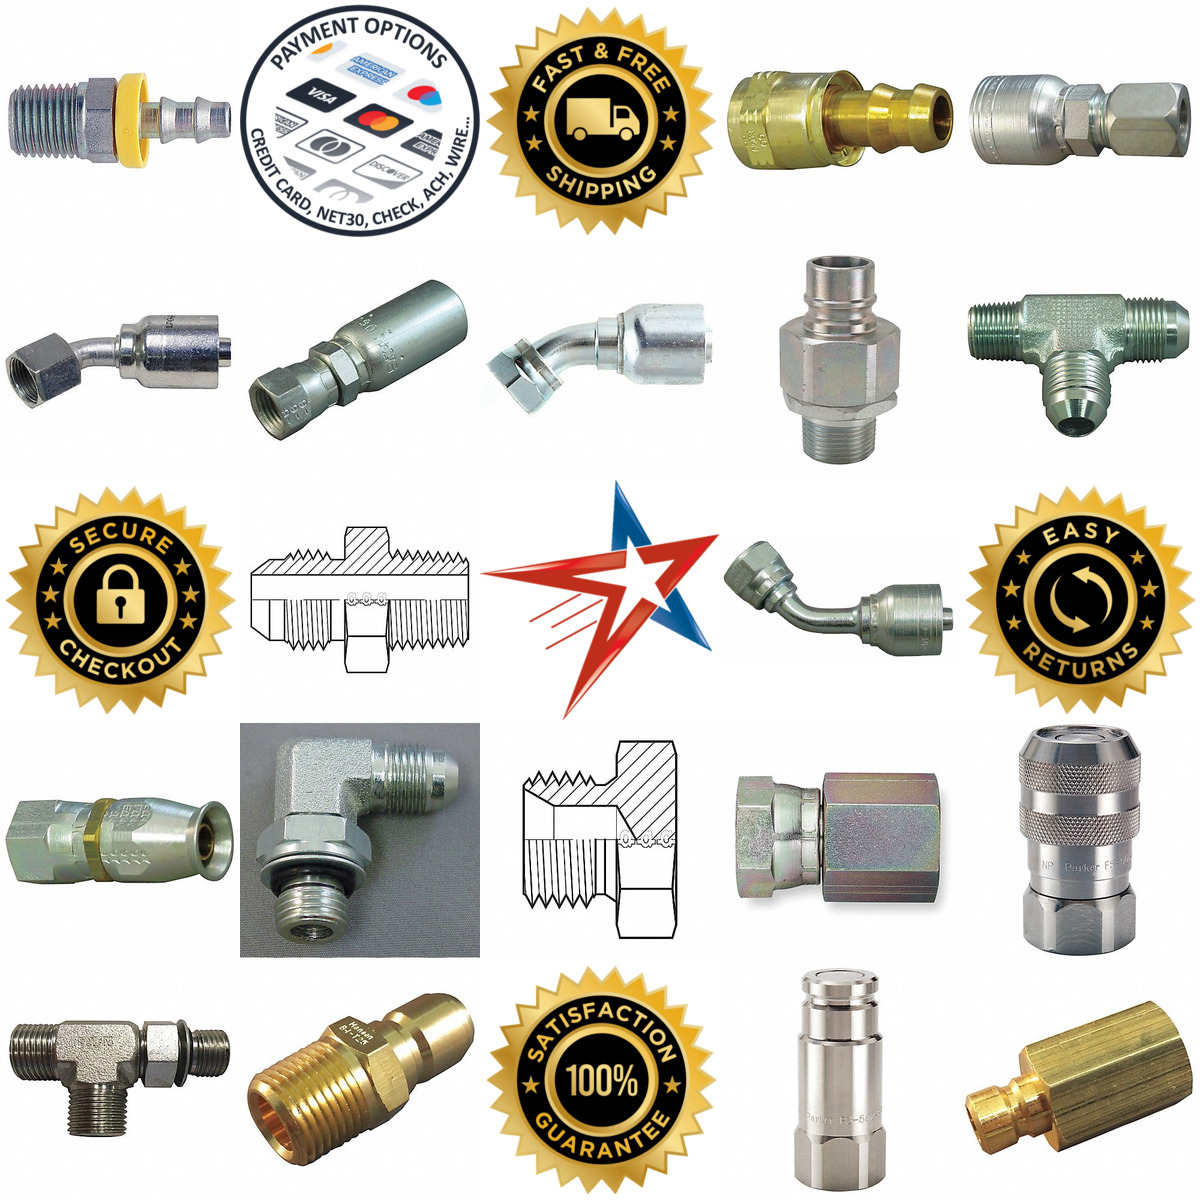 A selection of Hydraulic Hose Fittings and Couplings products on GoVets